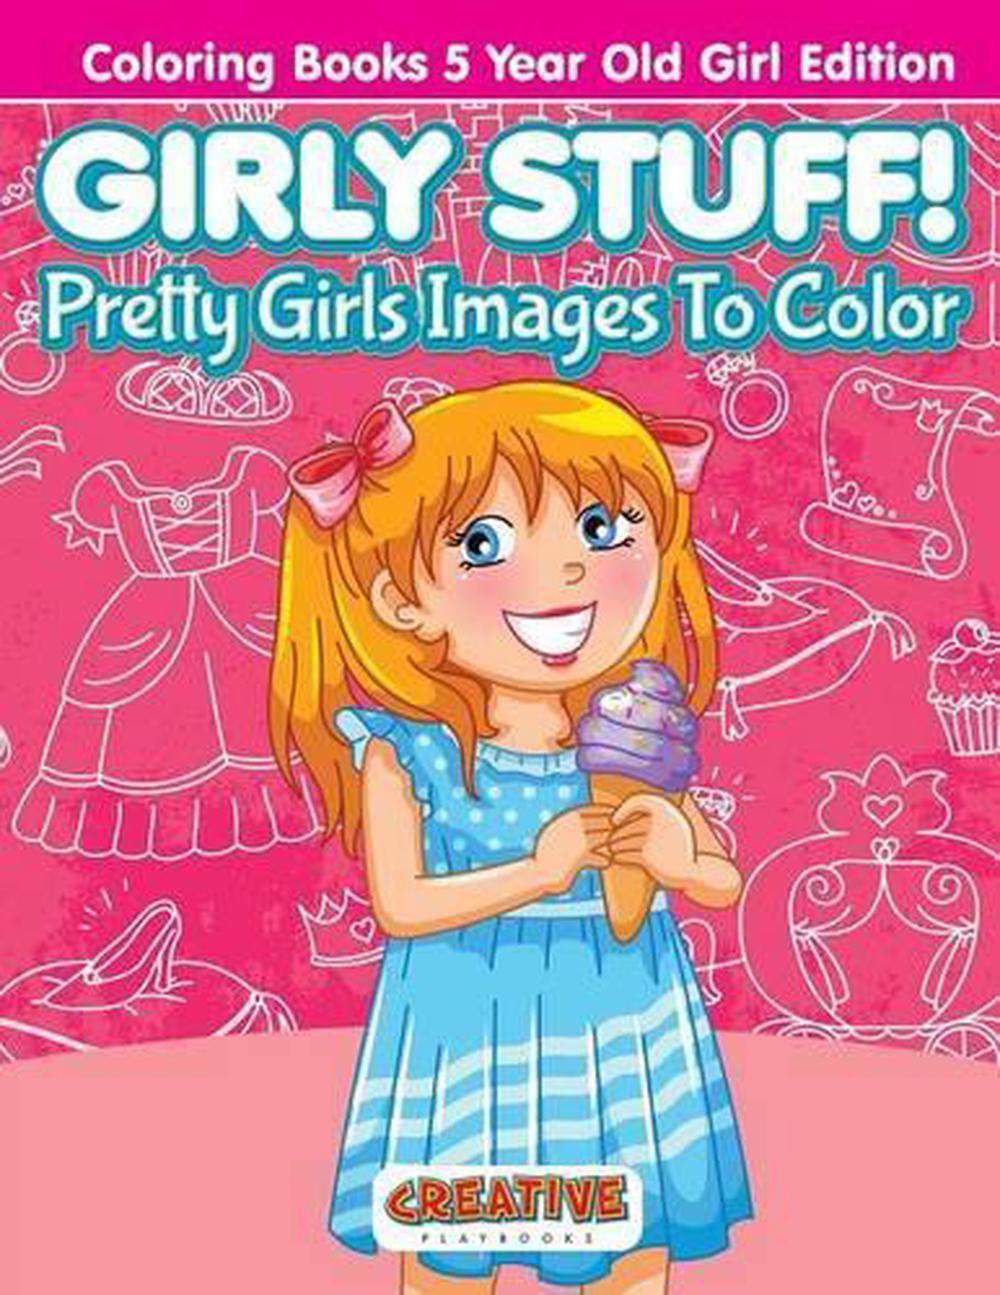 Girly Stuff! Pretty Girls Images to Color - Coloring Books 5 Year Old